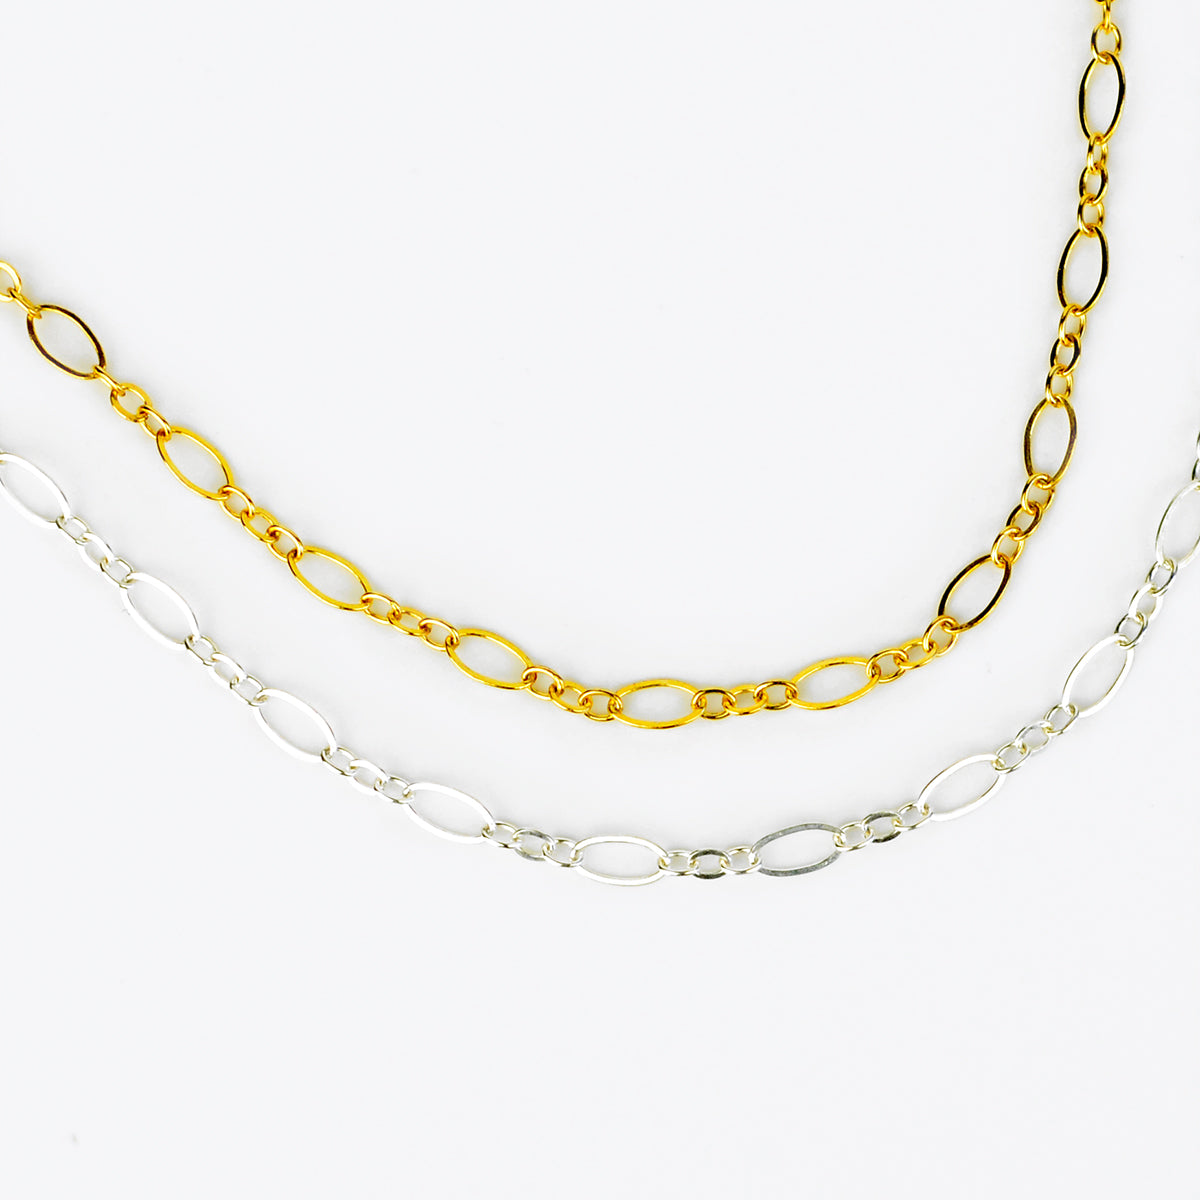 Adjustable Gold Sequin Disc Chain Necklace 18